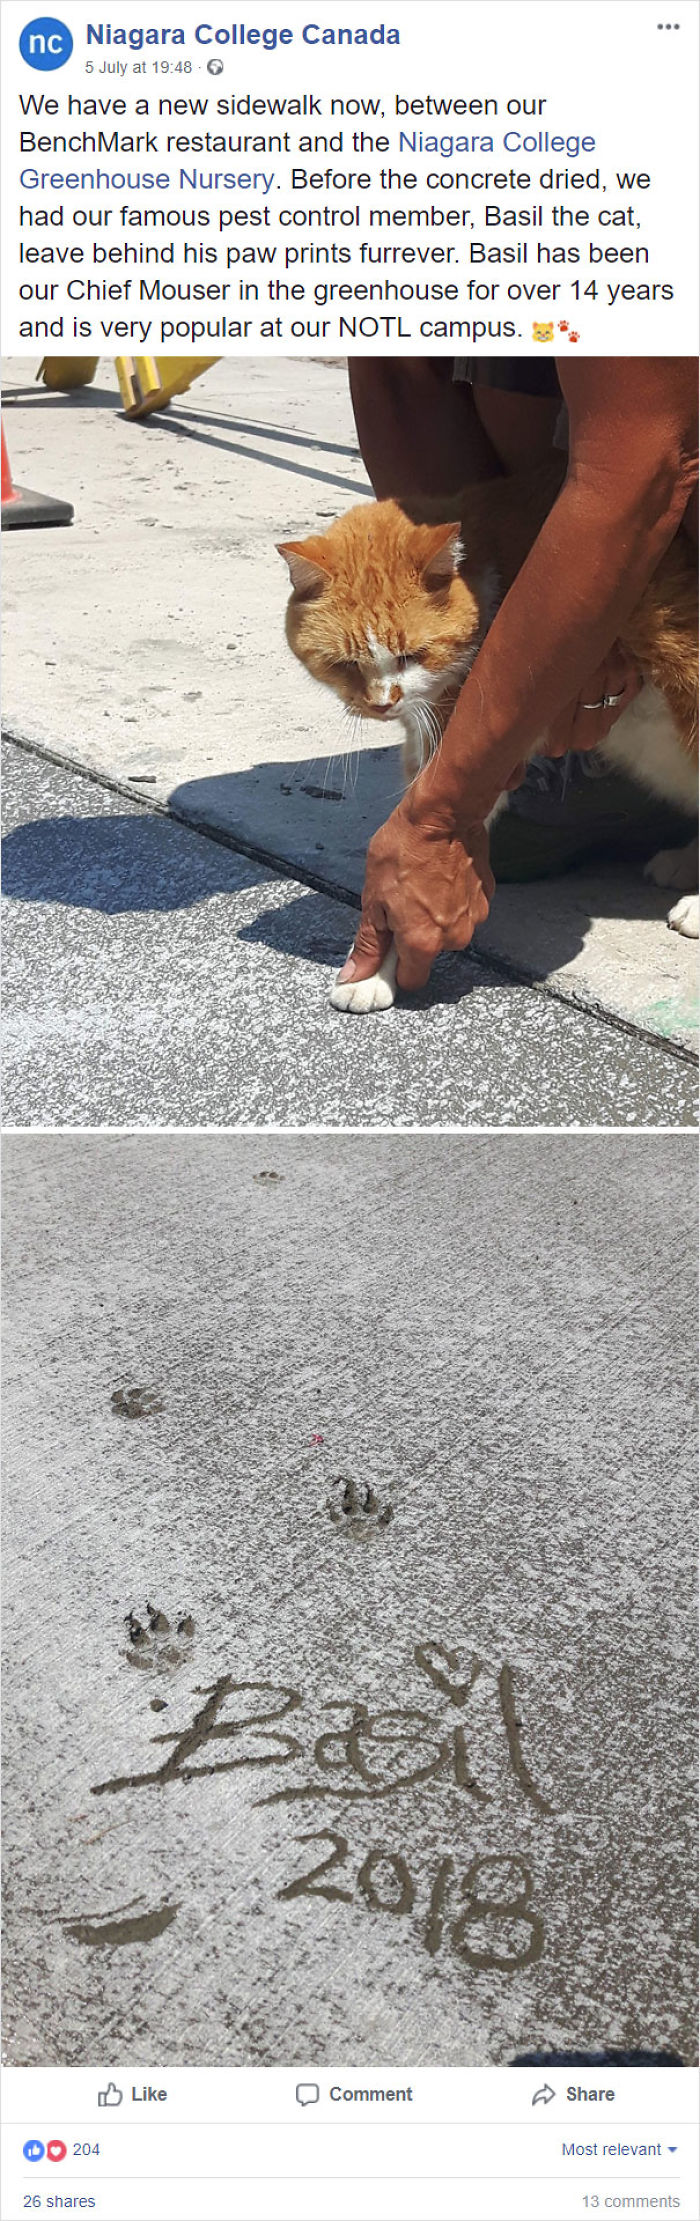 Meet Basil. For 14 Years He Has Been Cheif Mousier In The Pest Control Department At Niagara College. Today They Put A New Sidewalk And They Made Sure That His Paw Are On Campus Forever